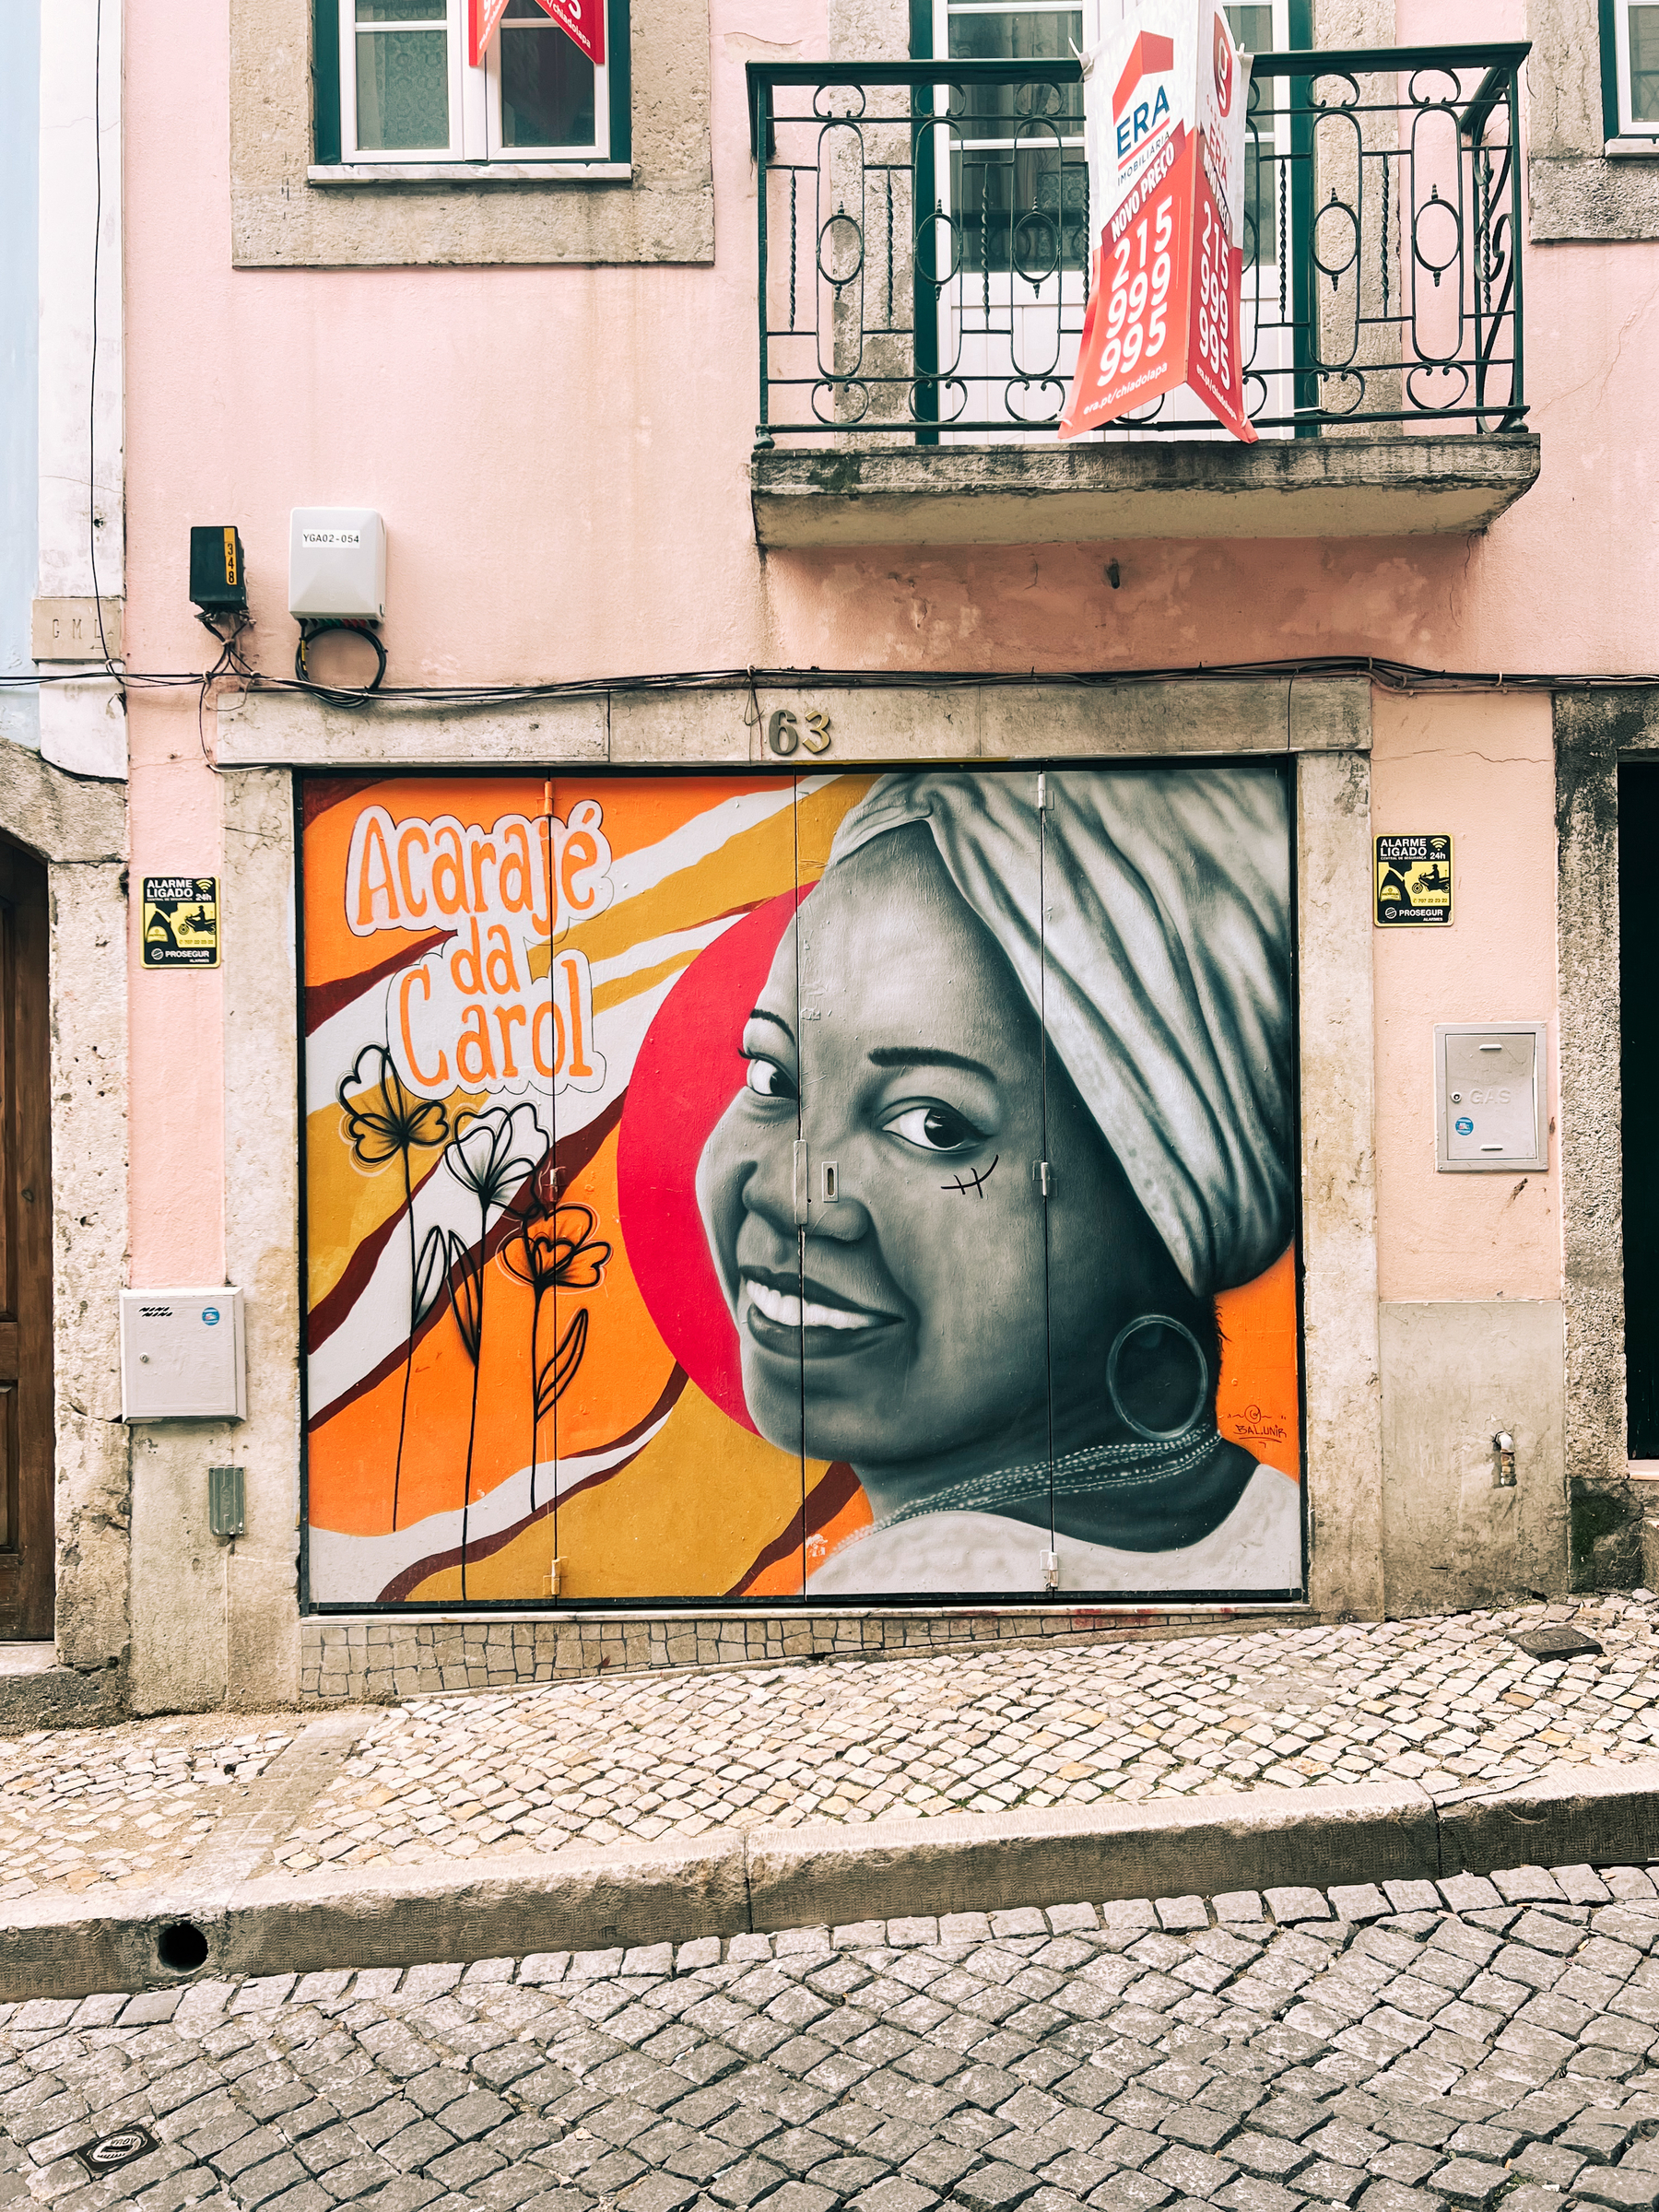 An urban scene showing a colorful street mural of a woman&rsquo;s smiling face on a building, with &ldquo;Acarajé da Carol&rdquo; written beside it. Above the mural, a balcony with a &ldquo;For Sale&rdquo; sign. Cobblestone street.